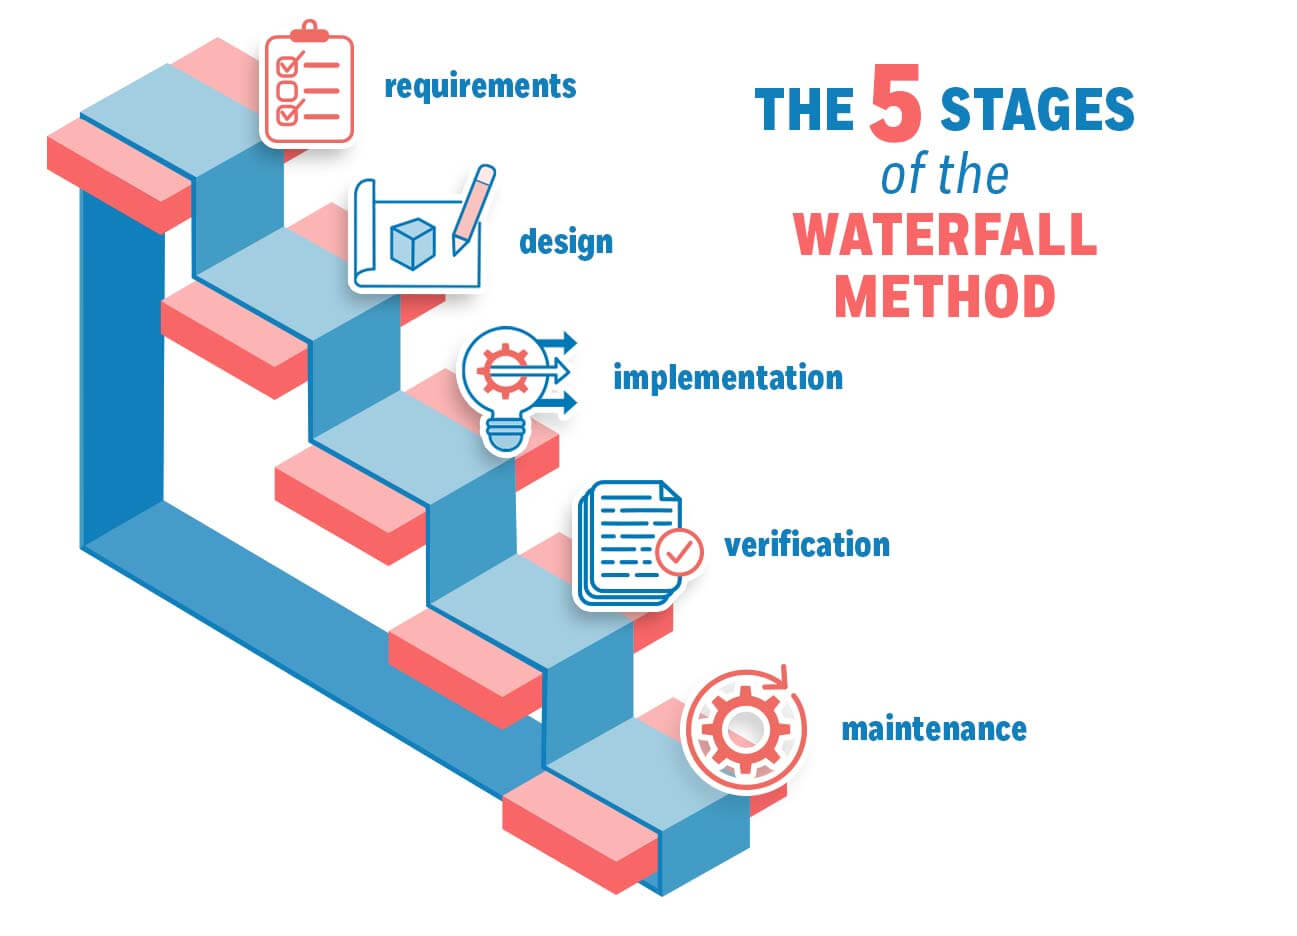 Waterfall Methodology: History, Principles, Stages & More